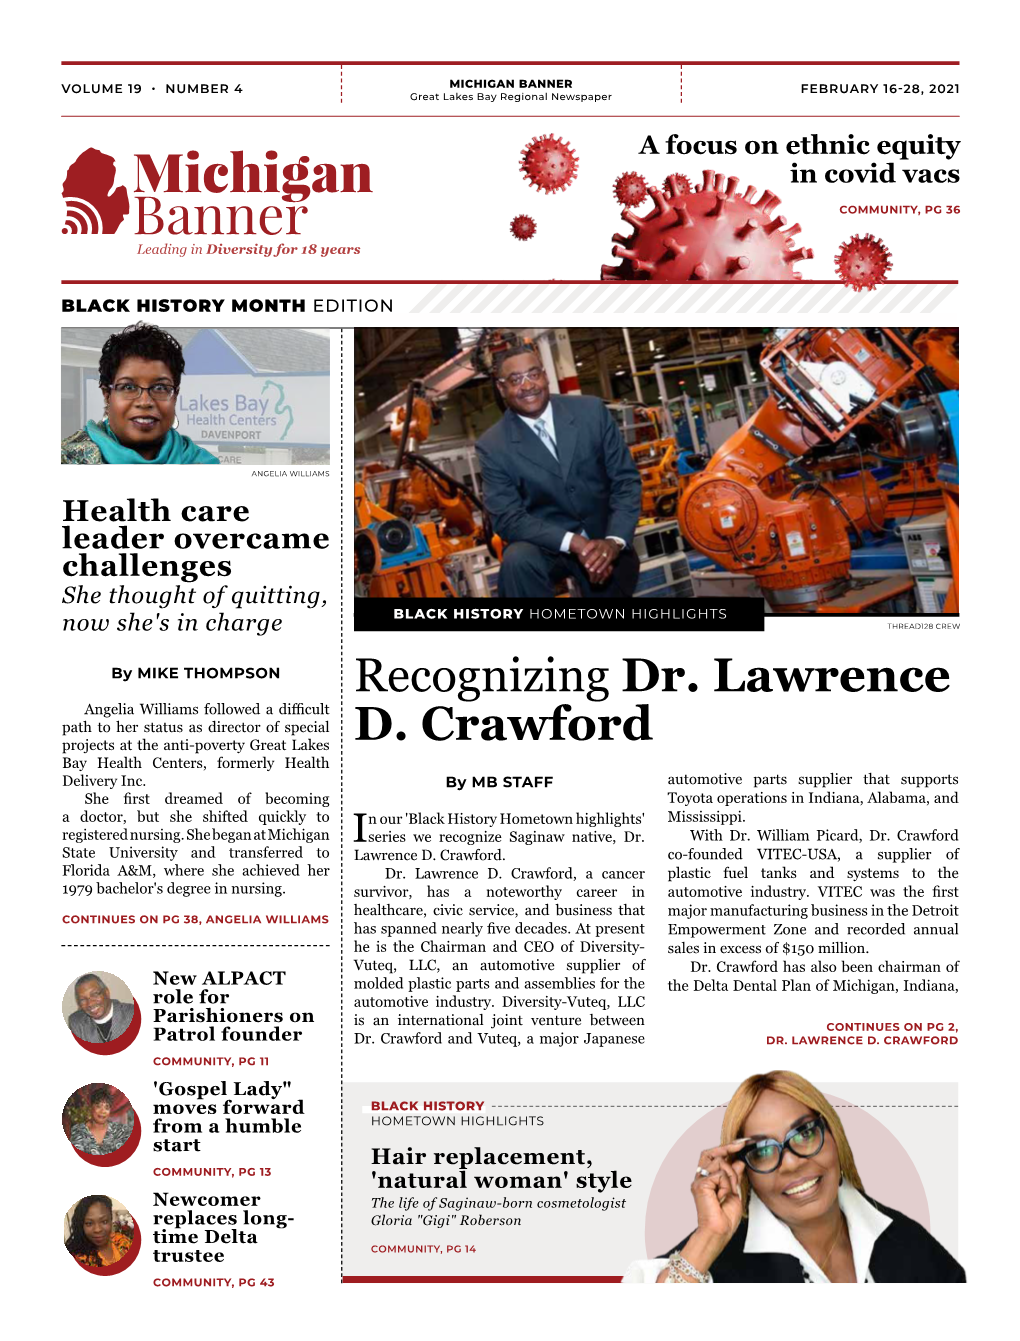 Recognizing Dr. Lawrence D. Crawford